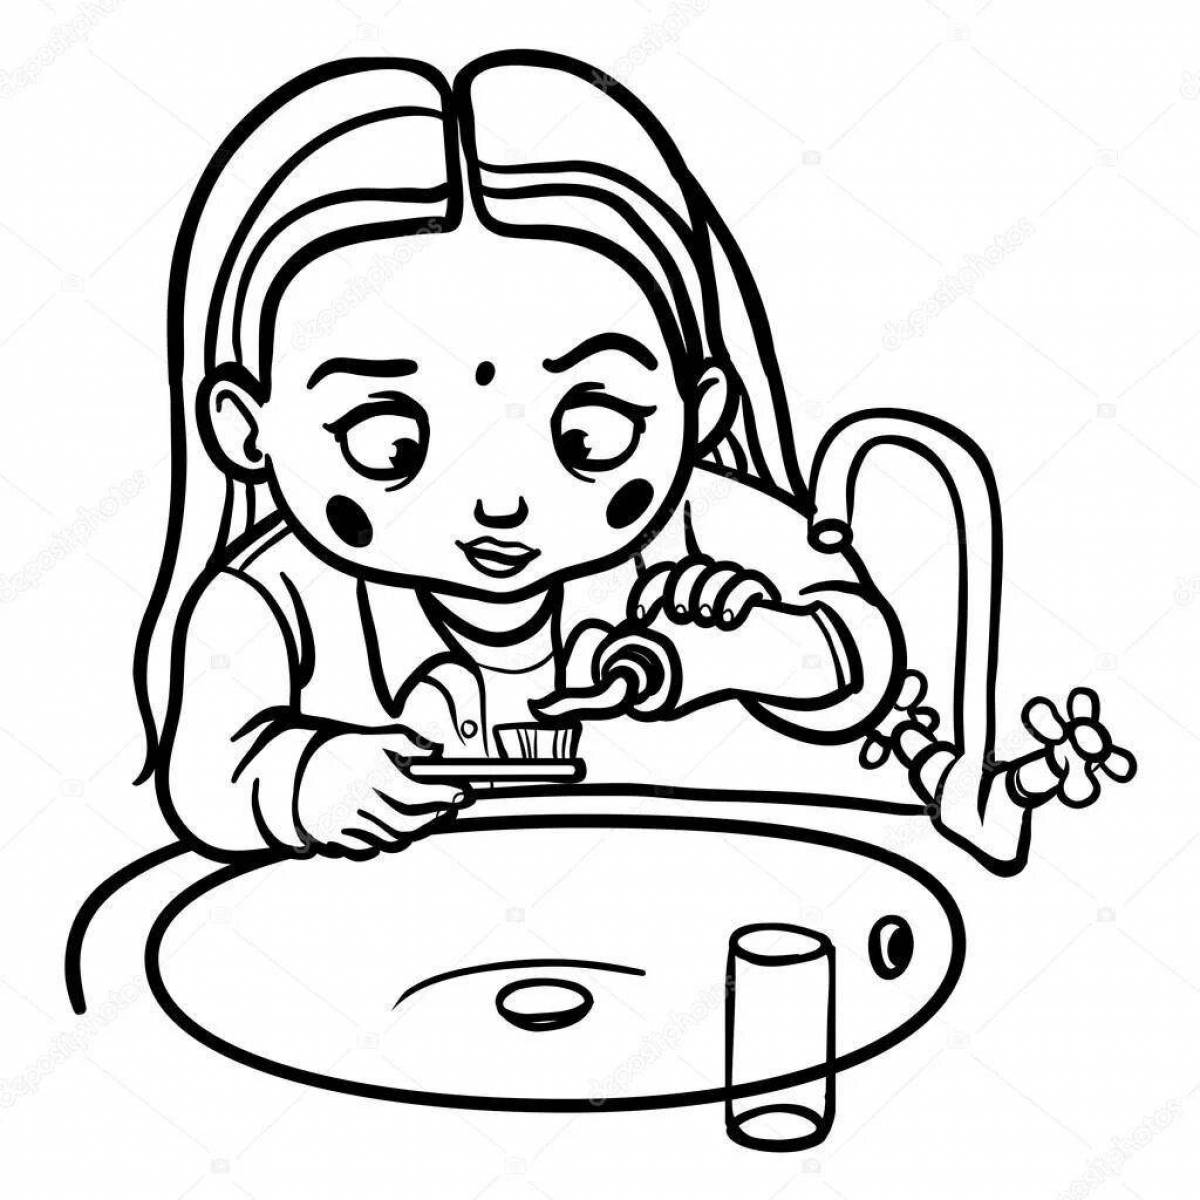 I wash my face coloring page